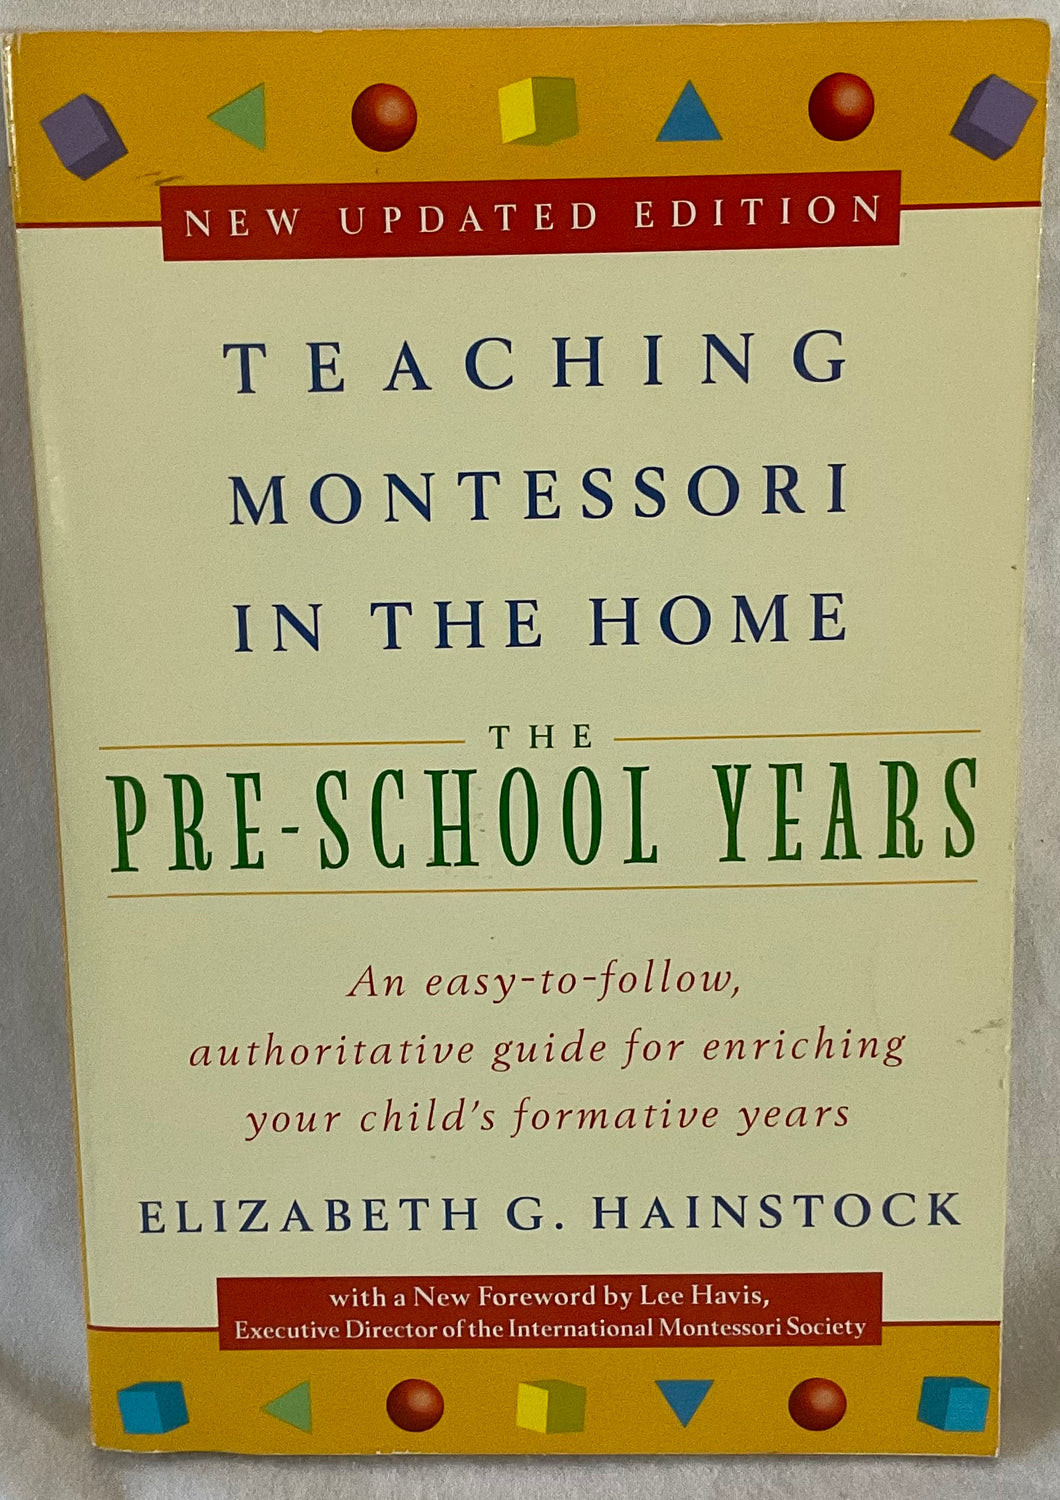 Teaching Montessori in the Home - The Pre-School Years for Ages 2-5 (1997 edition)